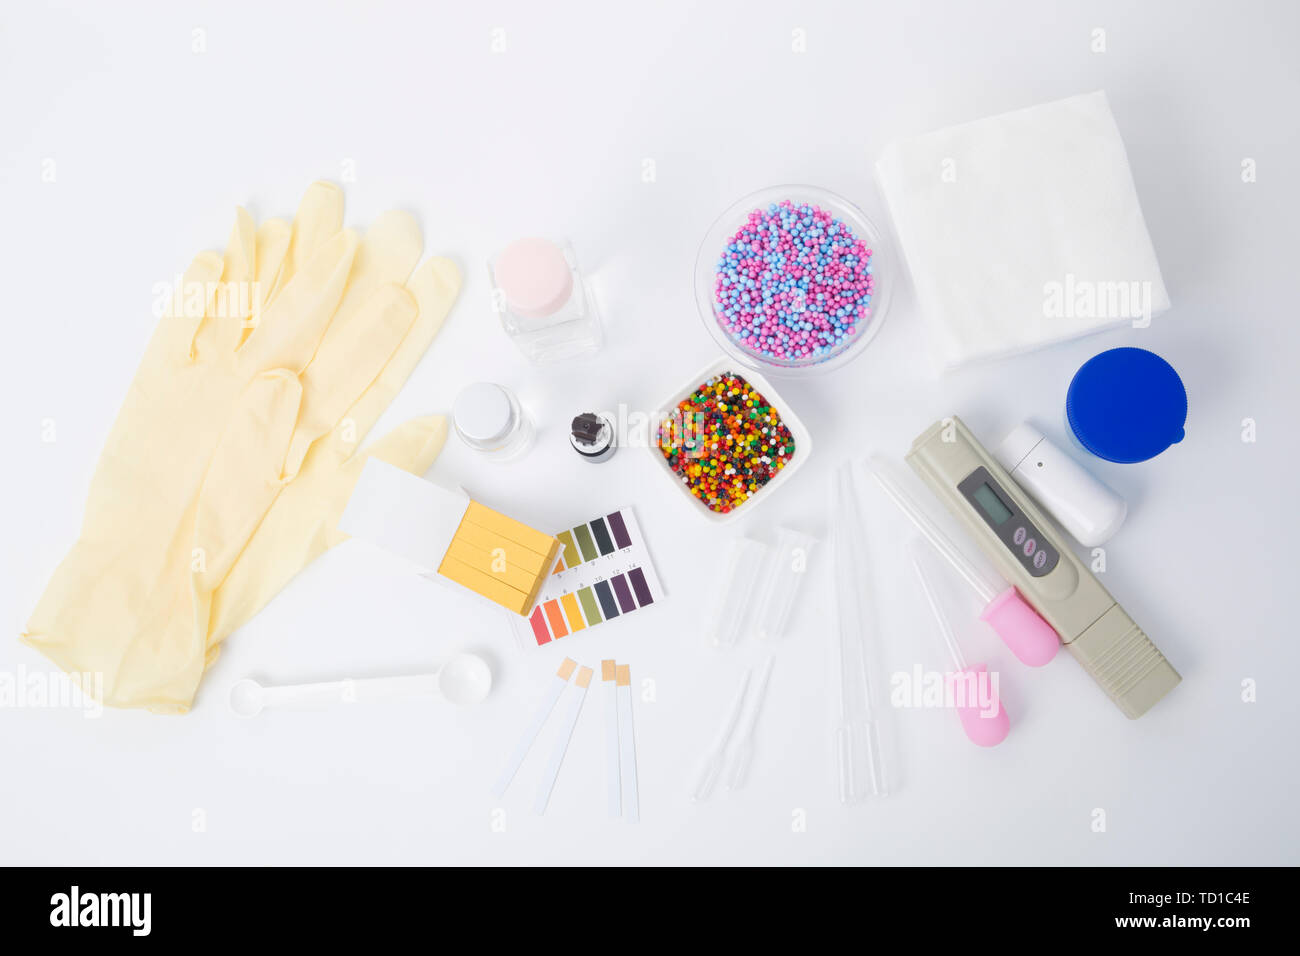 Cosmetics harmful ingredients detection tools, ph test paper, rubber gloves, chemical solution etc on white background Stock Photo